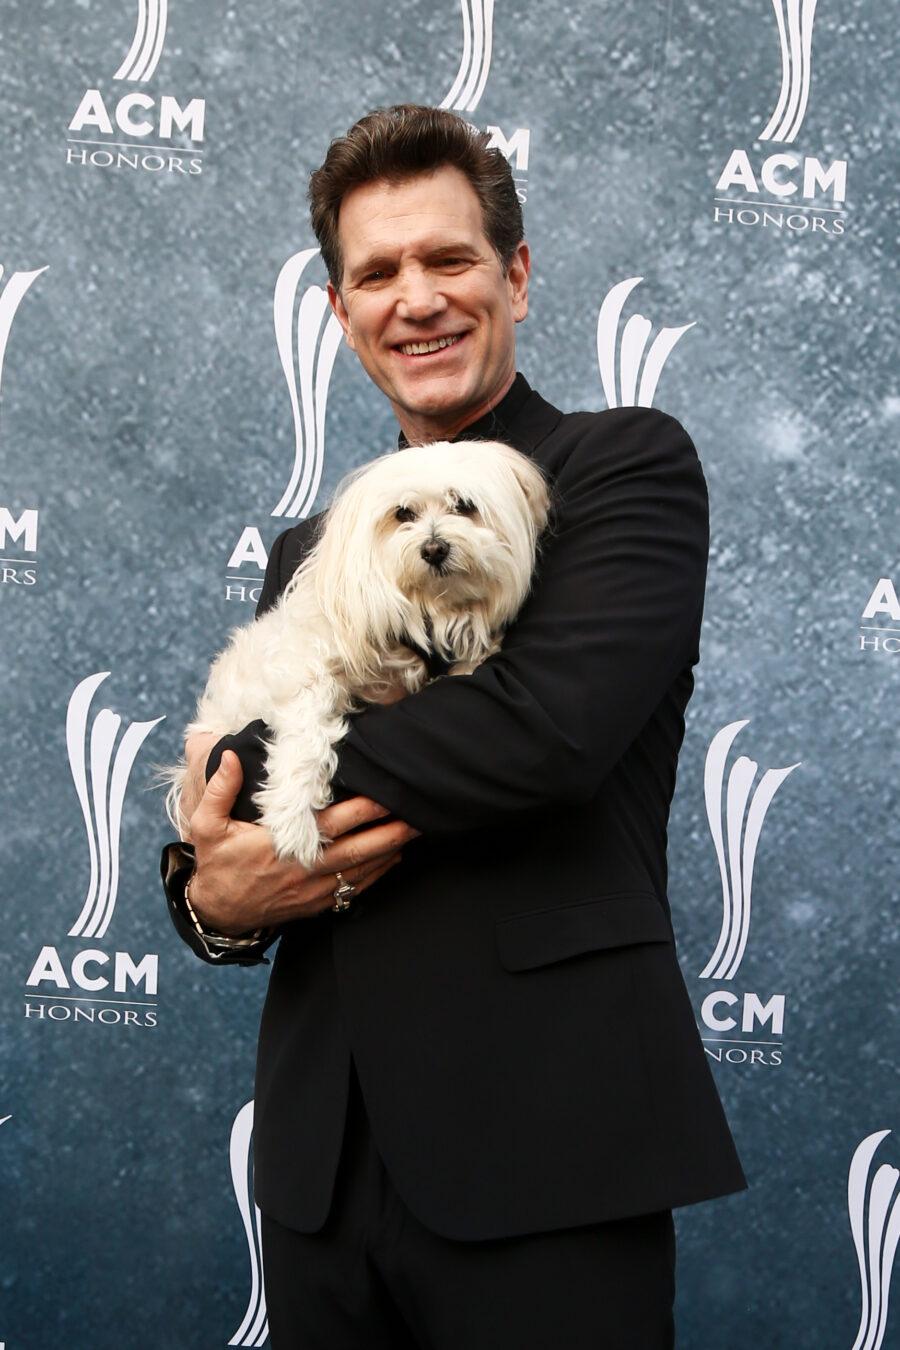 Chris Isaak and his dog, Rodney, attend the 9th Annual ACM Honors at the Ryman Auditorium on September 1, 2015 in Nashville, Tennessee. Shutterstock photo.